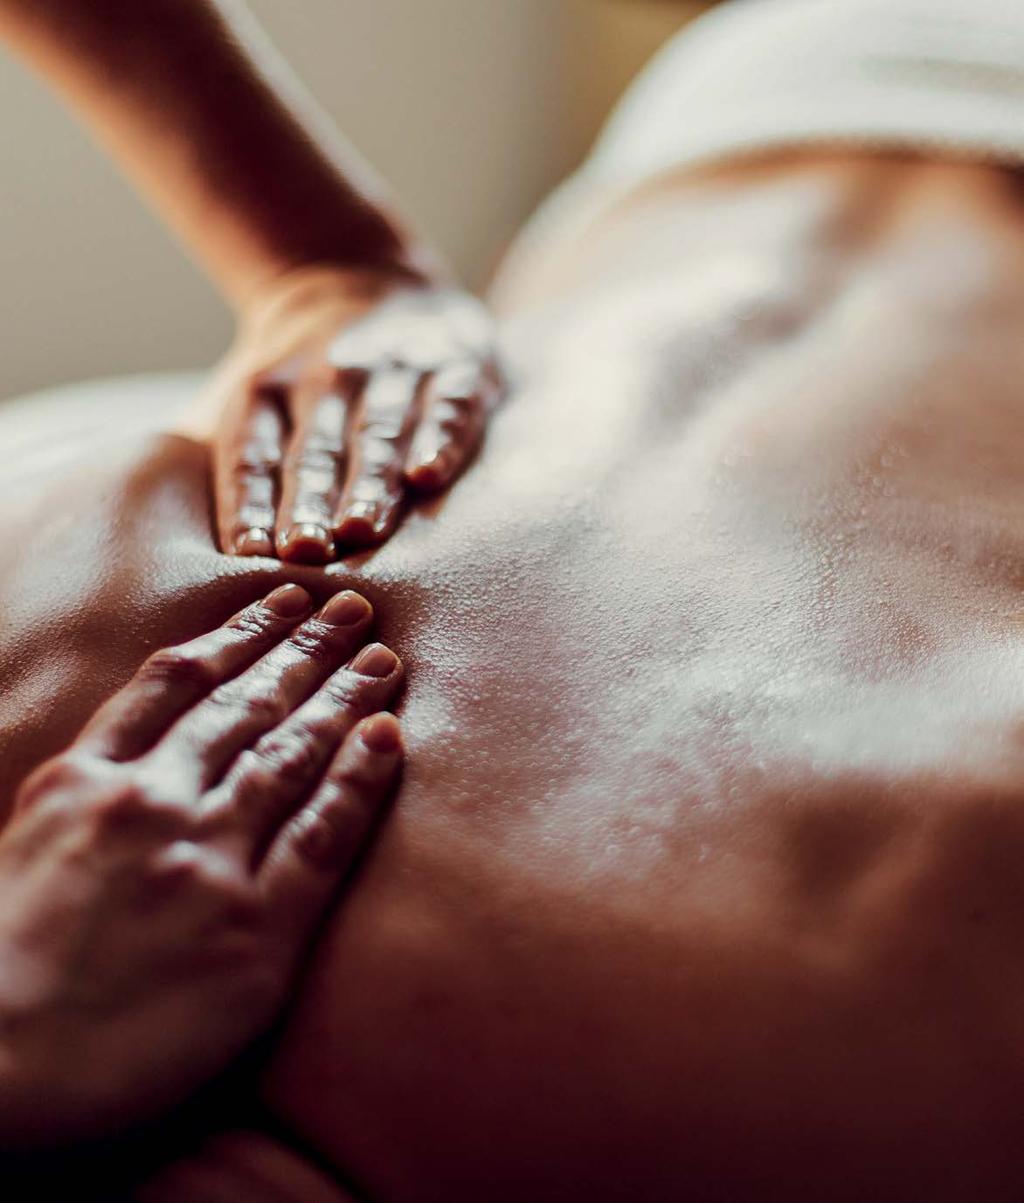 Discover our specialised treatments Discover our specialised treatments Aromatherapy massage 55 minutes for 70 ESPA aromatherapy massage is professional and specific, using a blend of individually